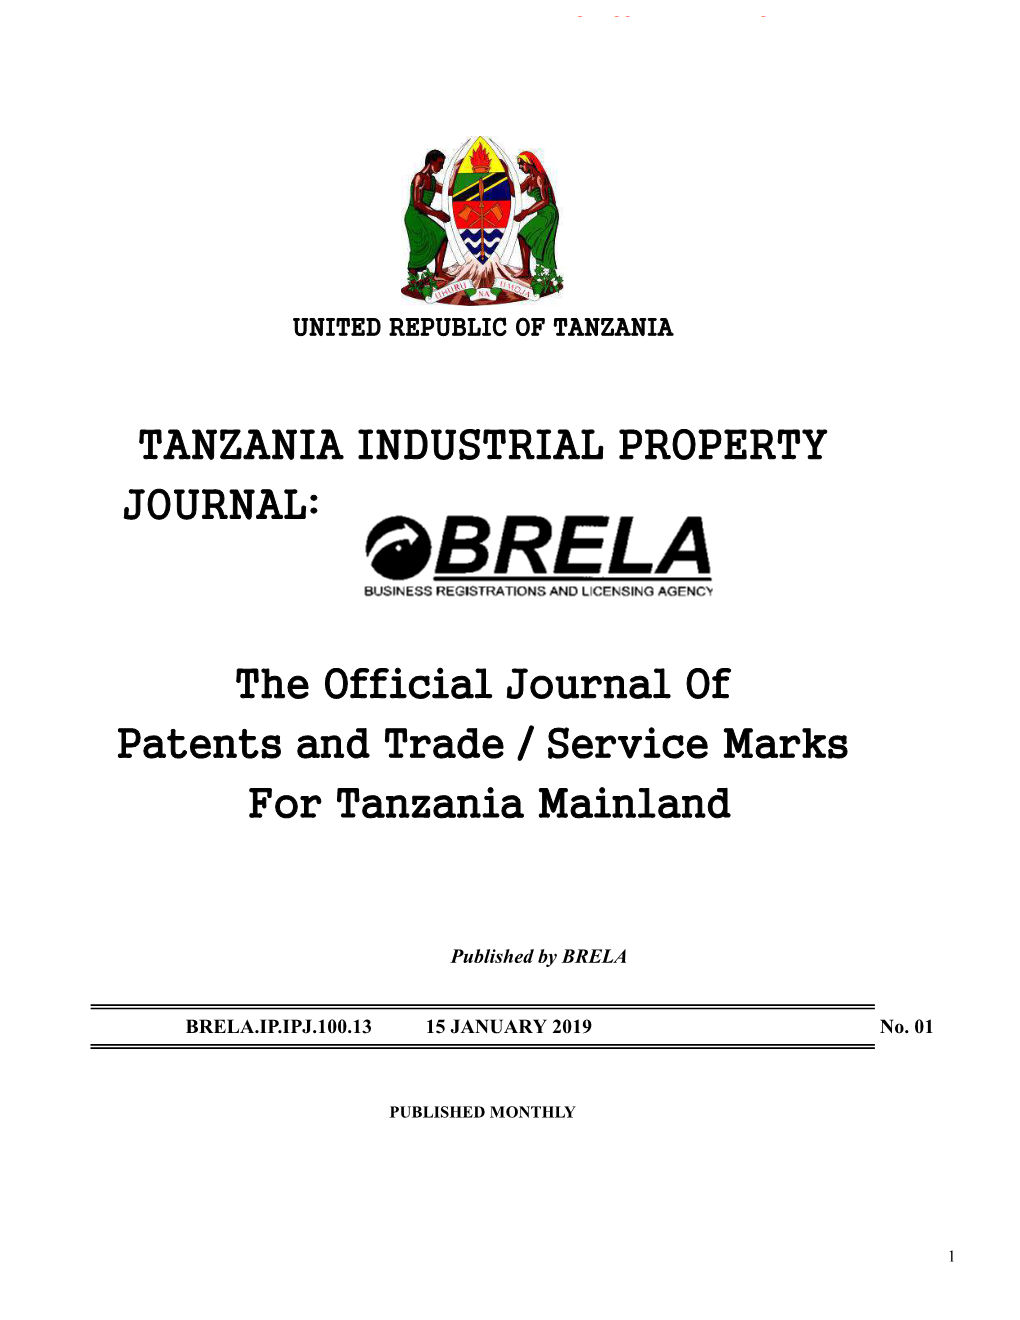 The Official Journal of Patents and Trade / Service Marks for Tanzania